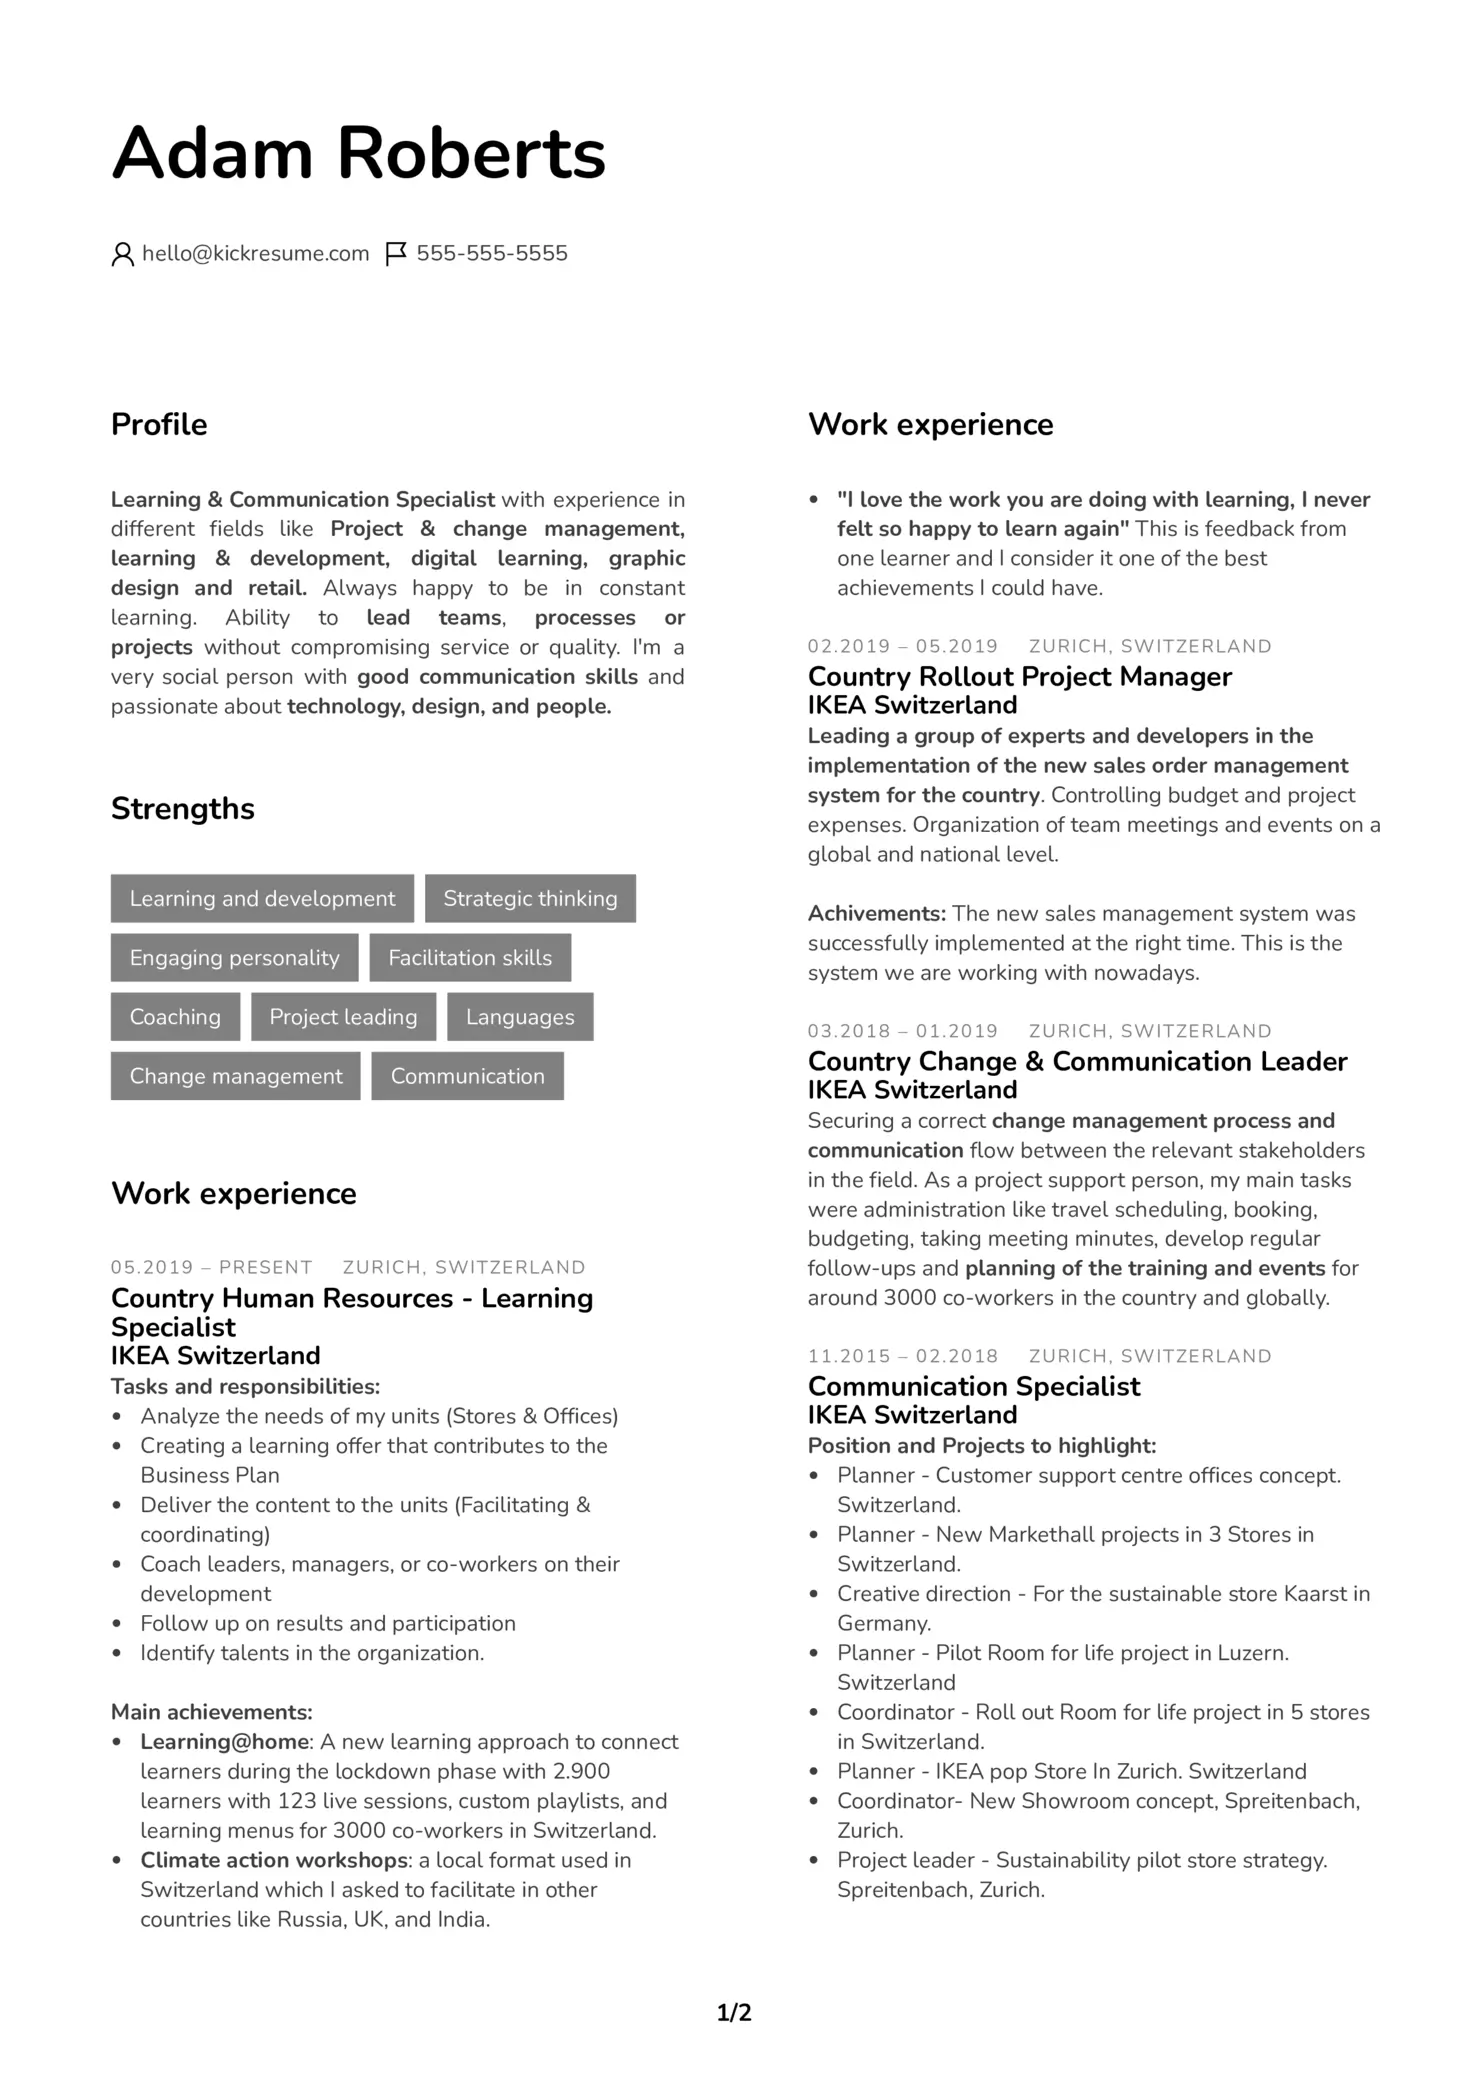 Learning & Development Manager at PepsiCo Resume Sample